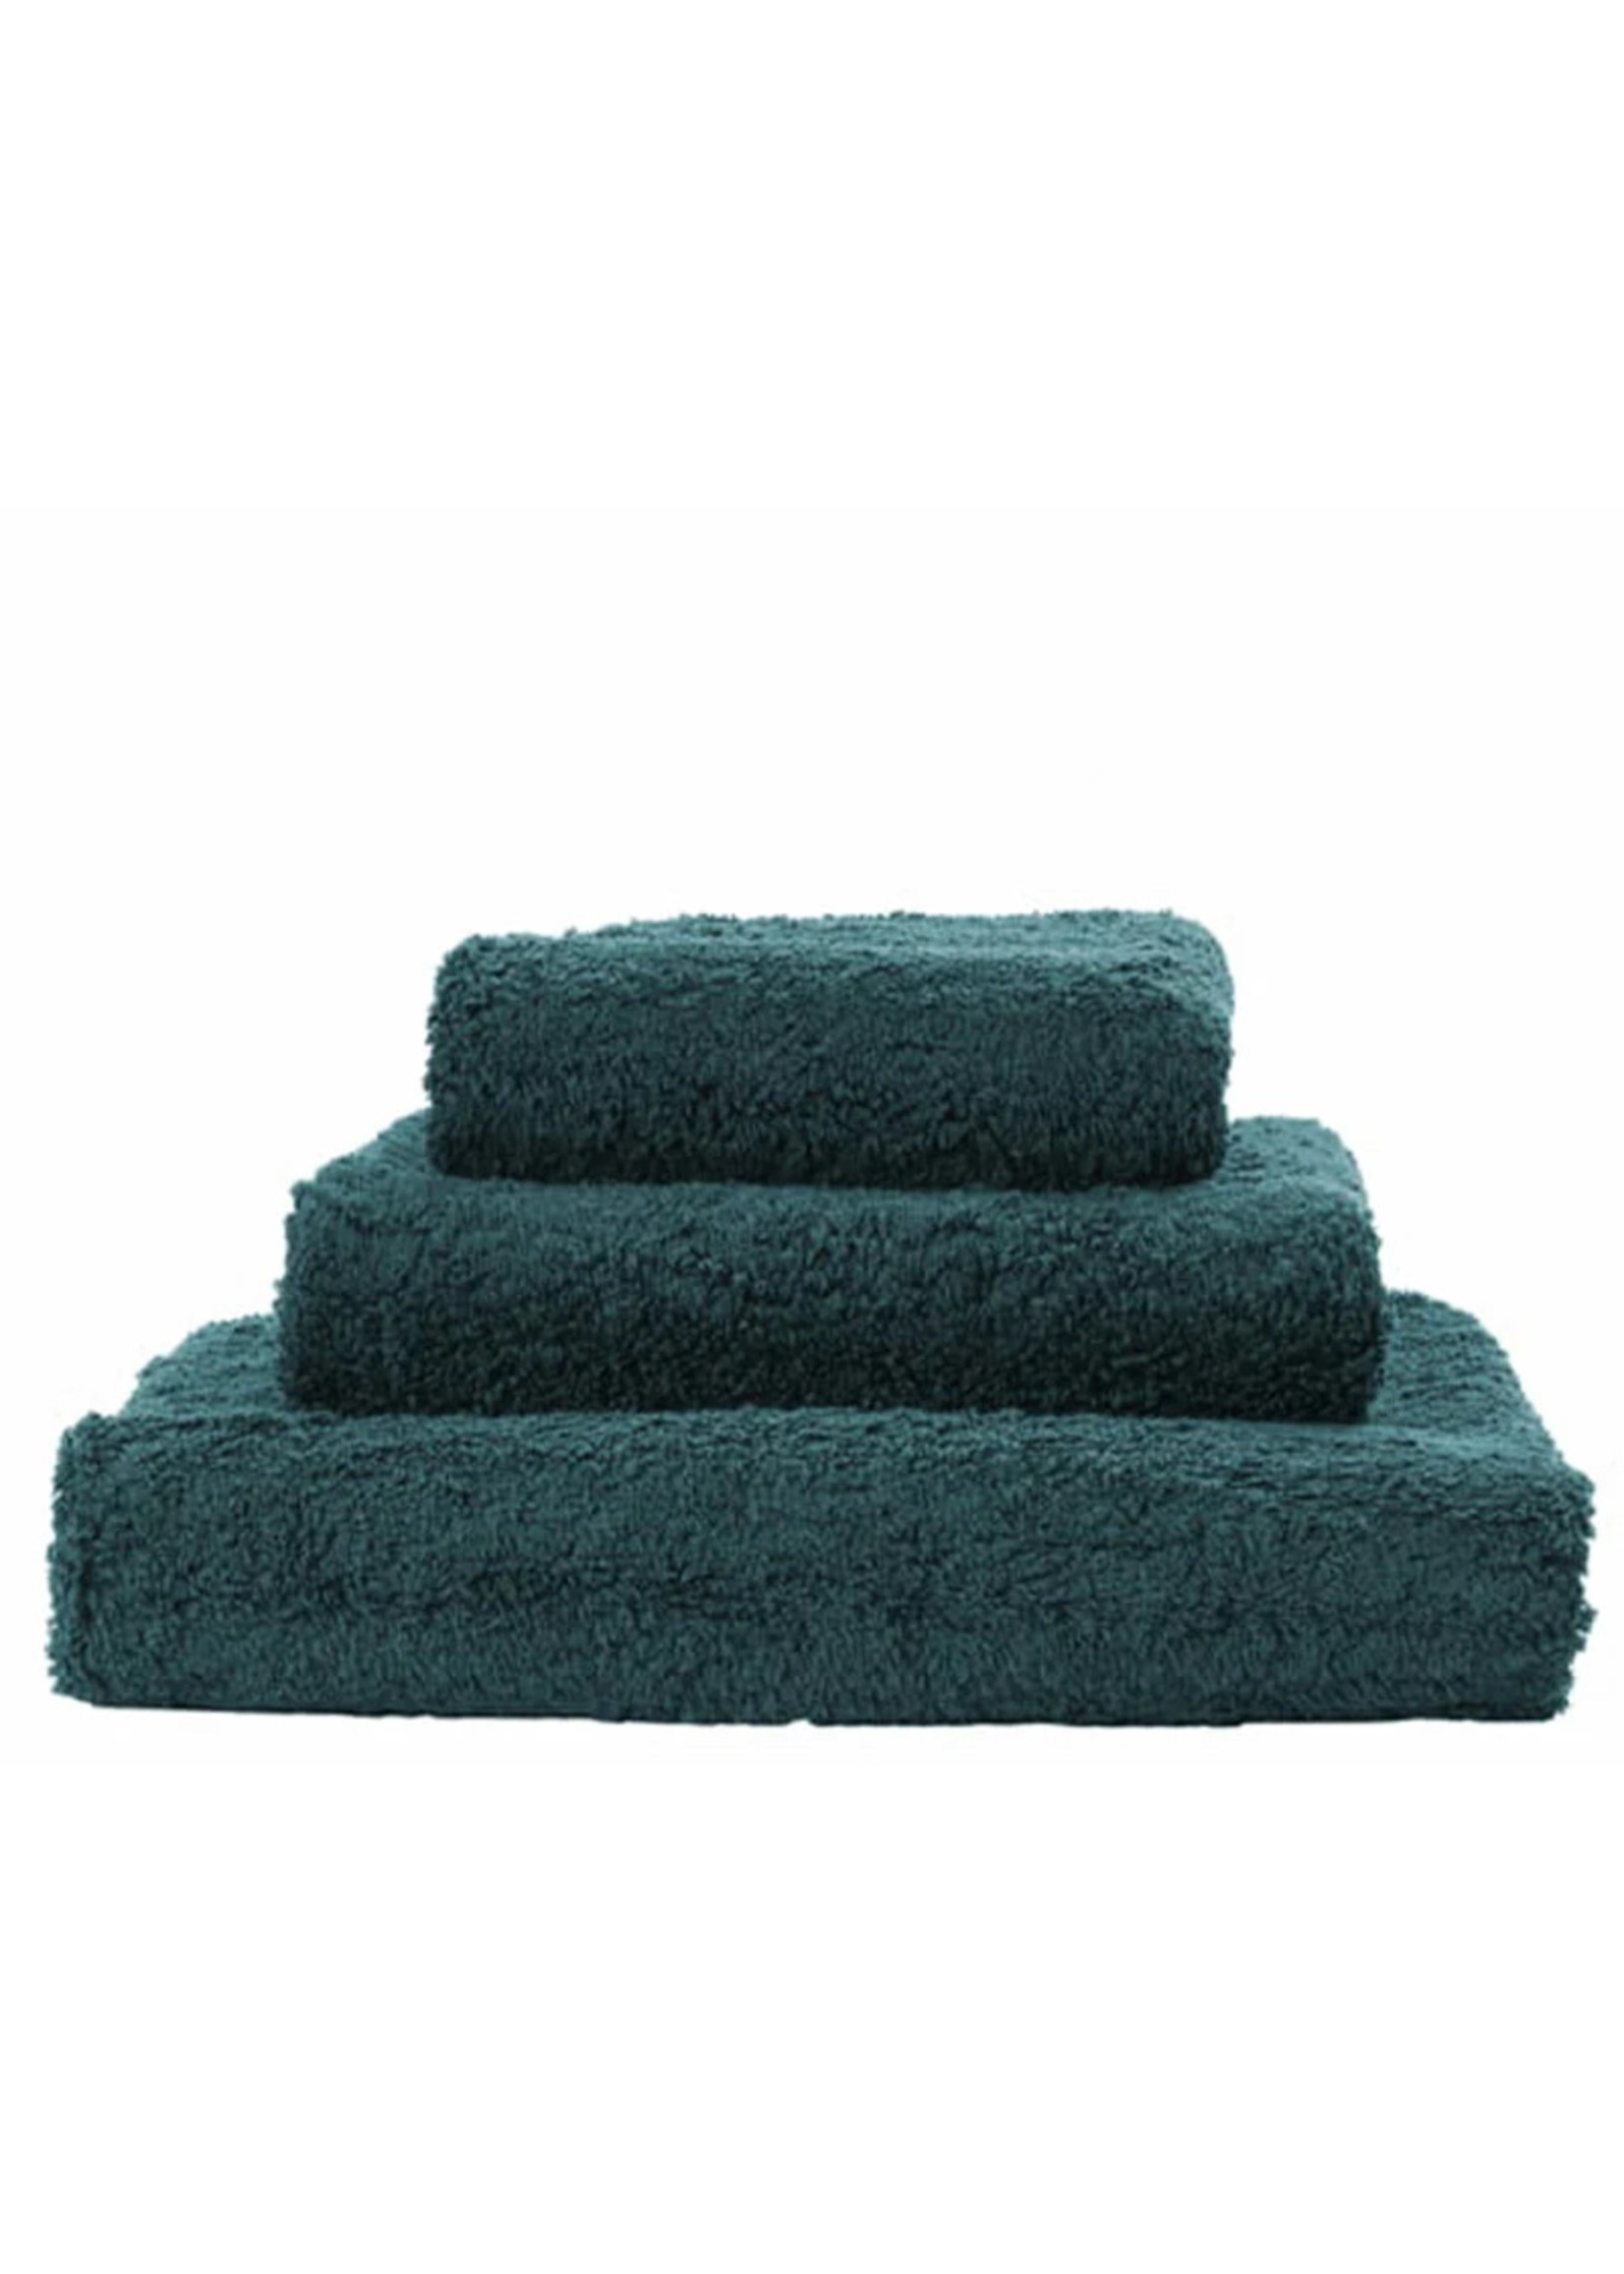 Abyss & Habidecor Super Pile Duck Towels